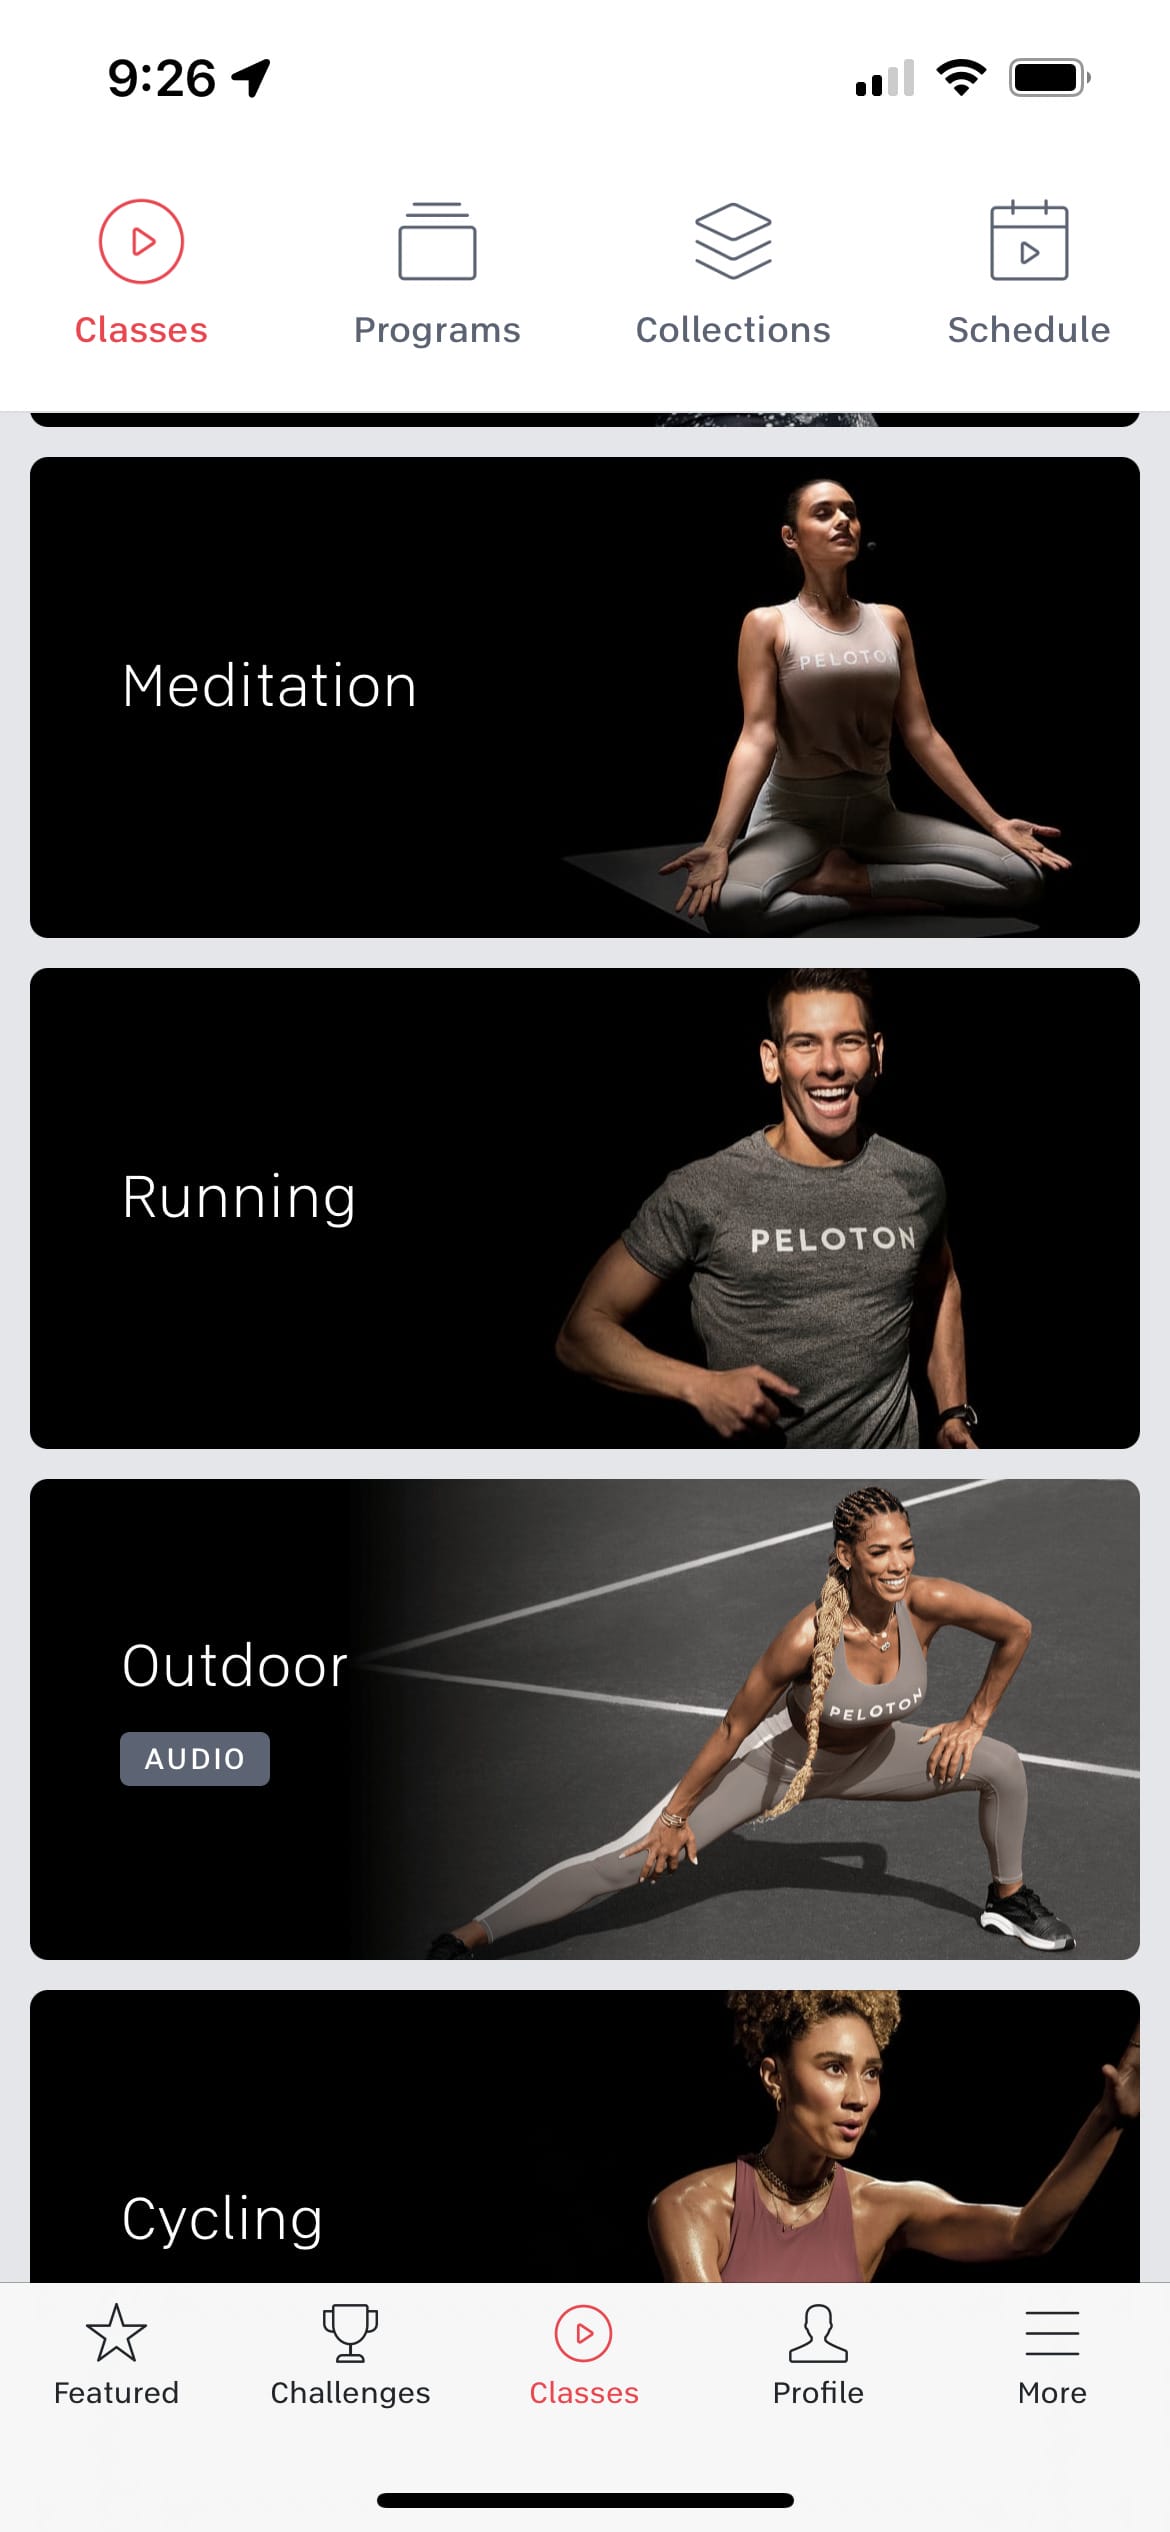 Updated Peloton modality icons with Kirsten Ferguson's picture for Outdoor.